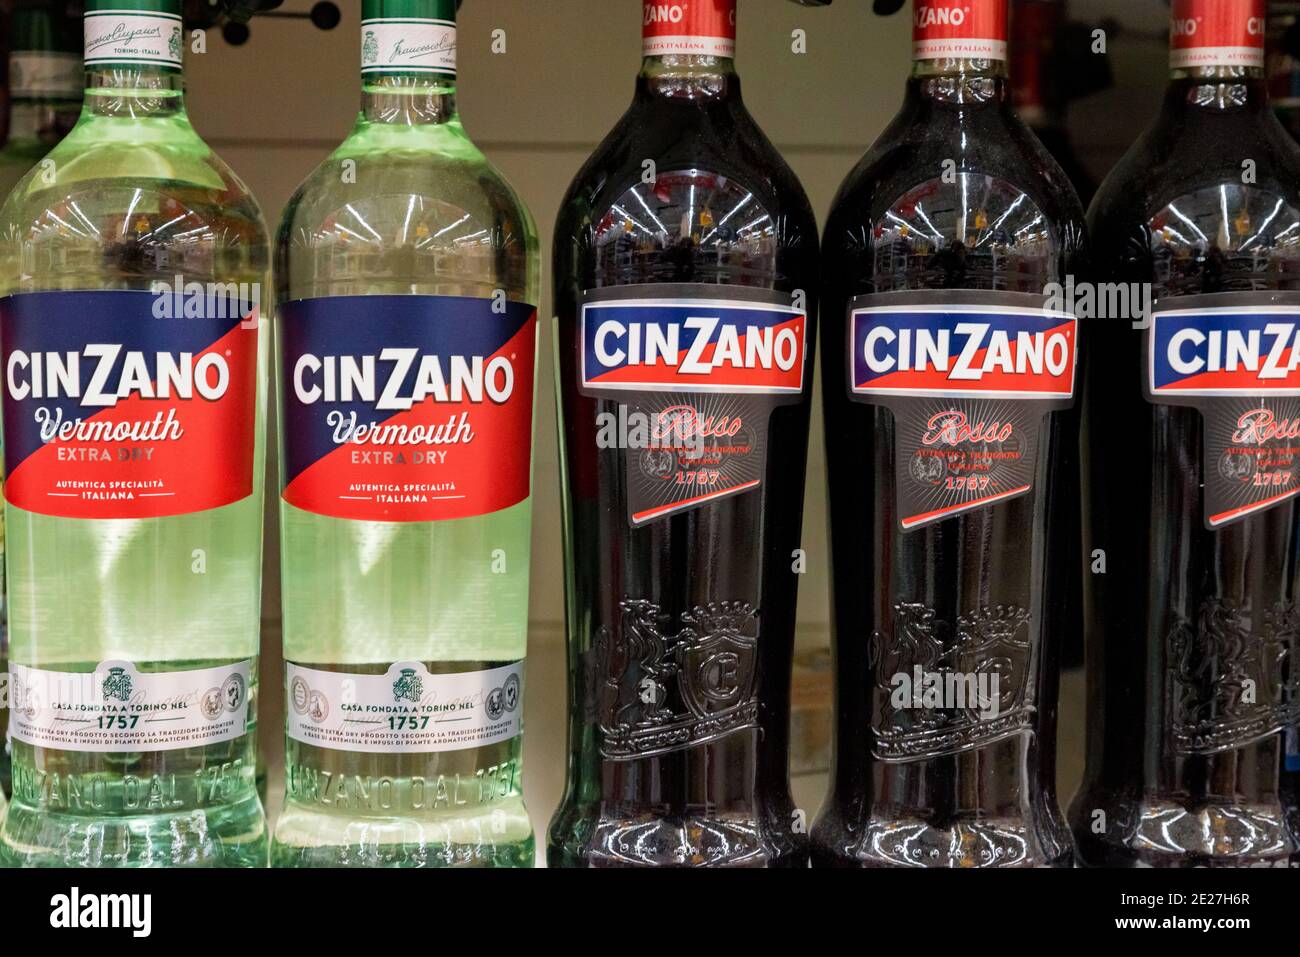 ROSTOV-ON-DON, RUSSIA - CIRCA NOVEMBER 2019: line of Cinzano Vermouth and Cinzano rosso bottles. Cinzano is an Italian brand of vermouth, a brand owne Stock Photo